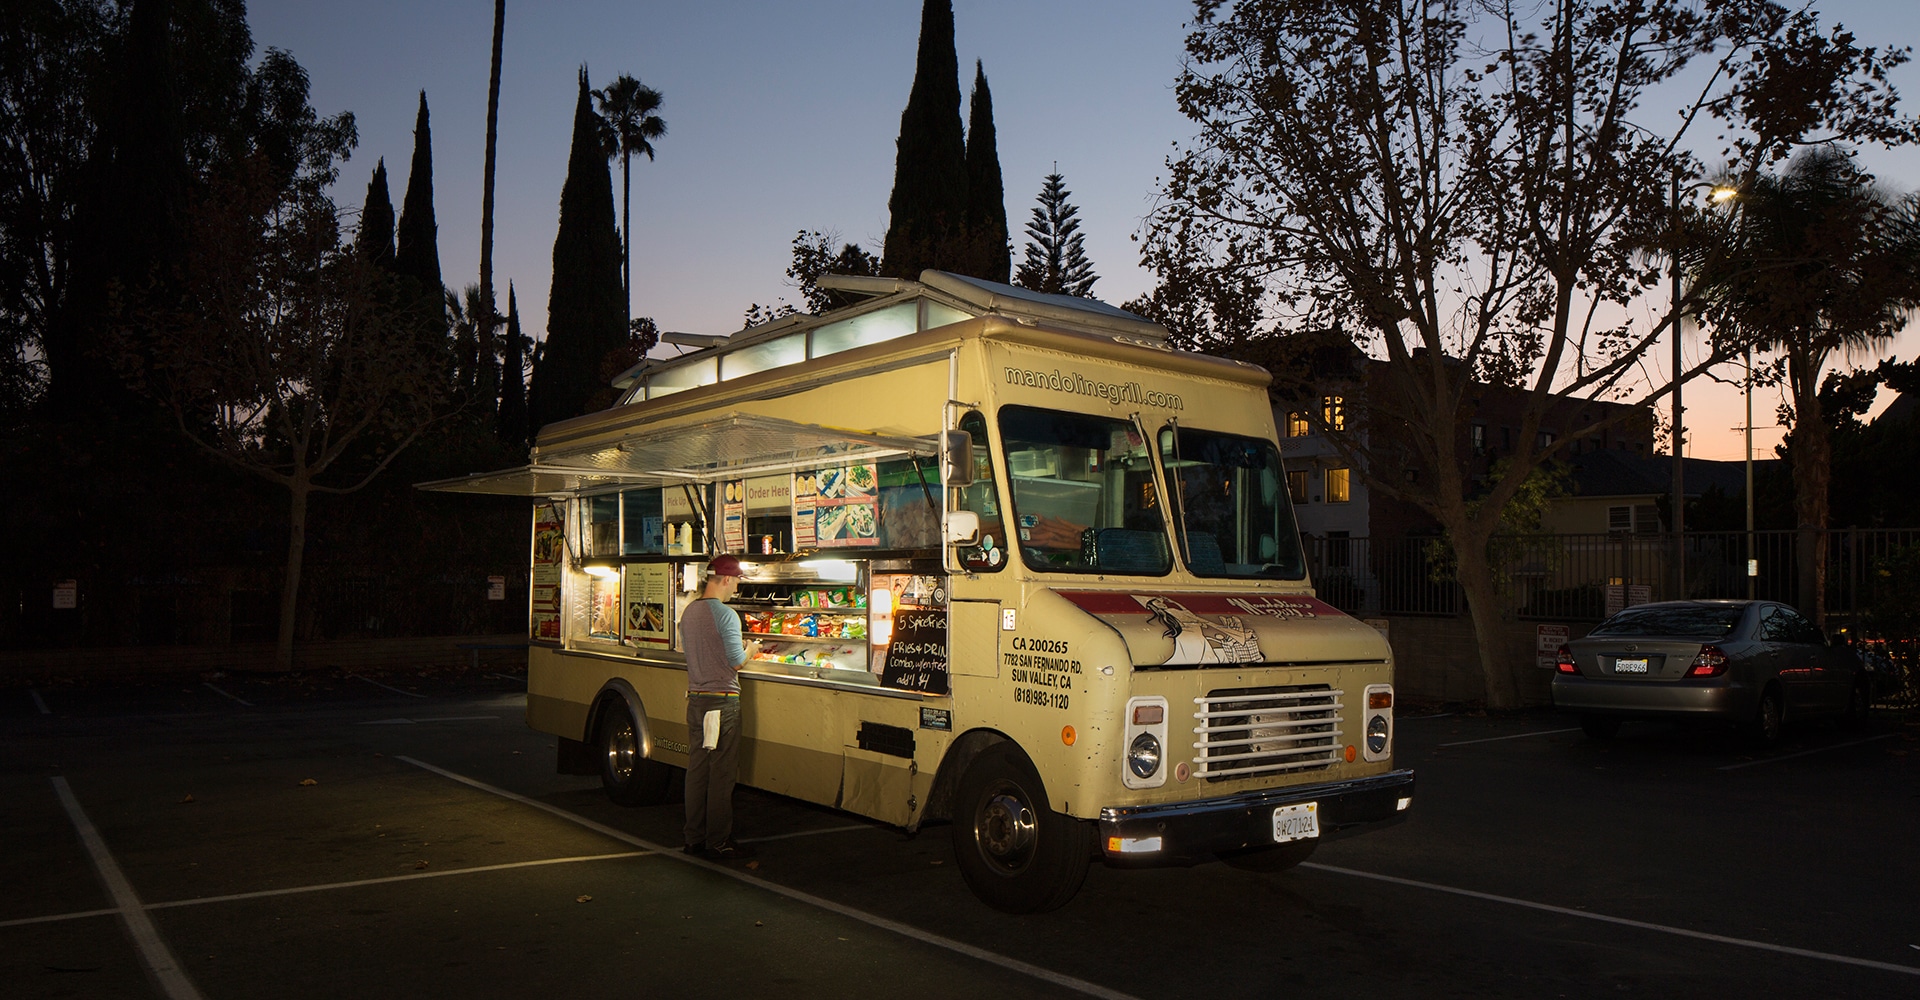 Studio Talk: Food Truck Panel with National Geographic’s Gerd Ludwig